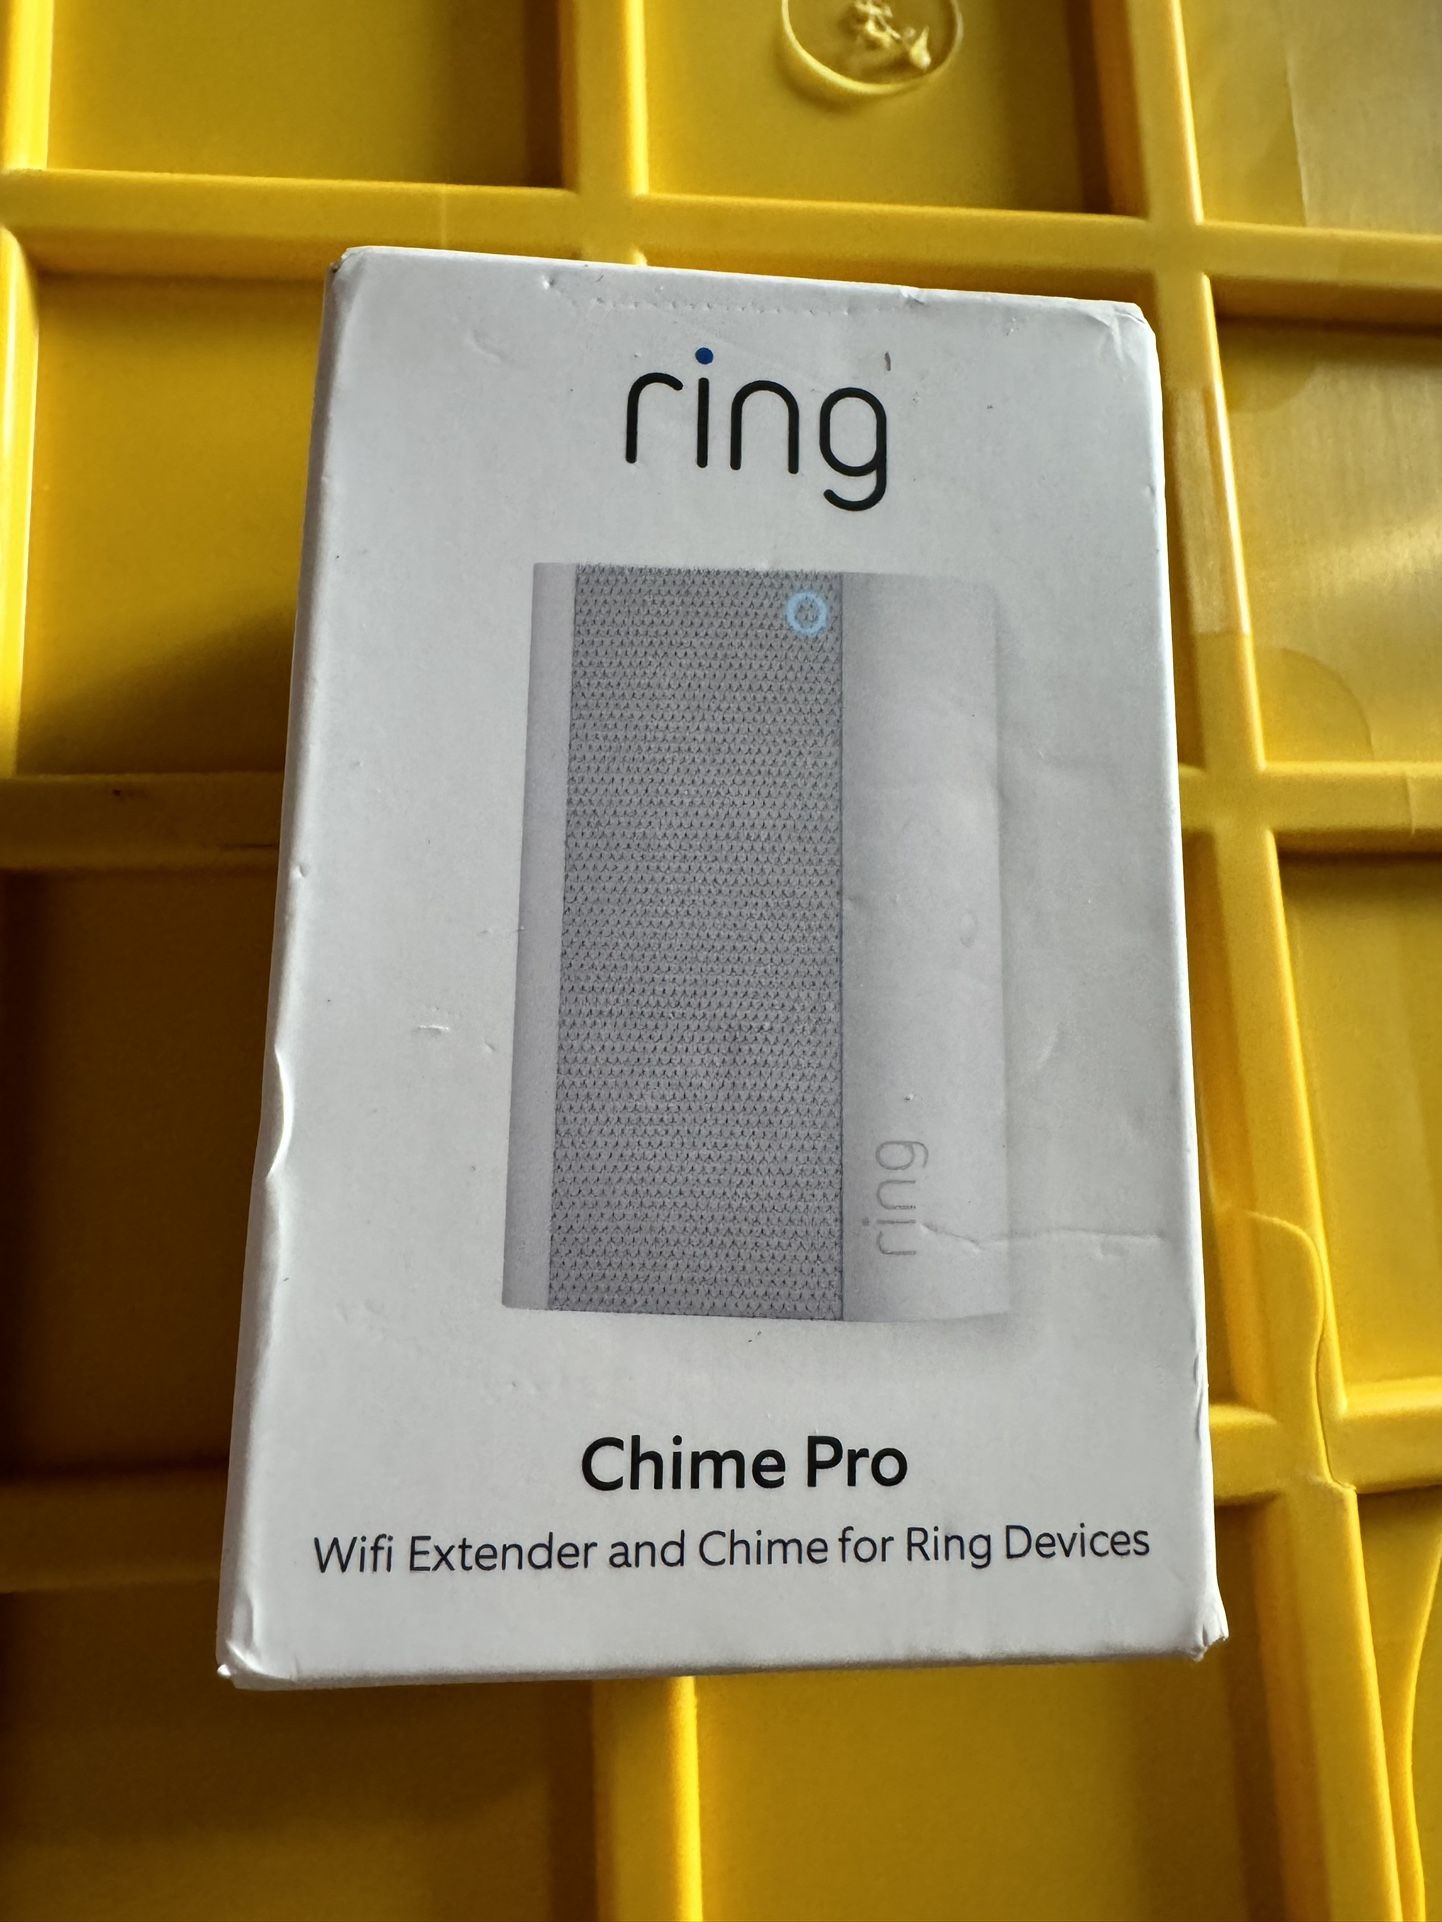 Ring Chime Pro for Ring video doorbells and cameras